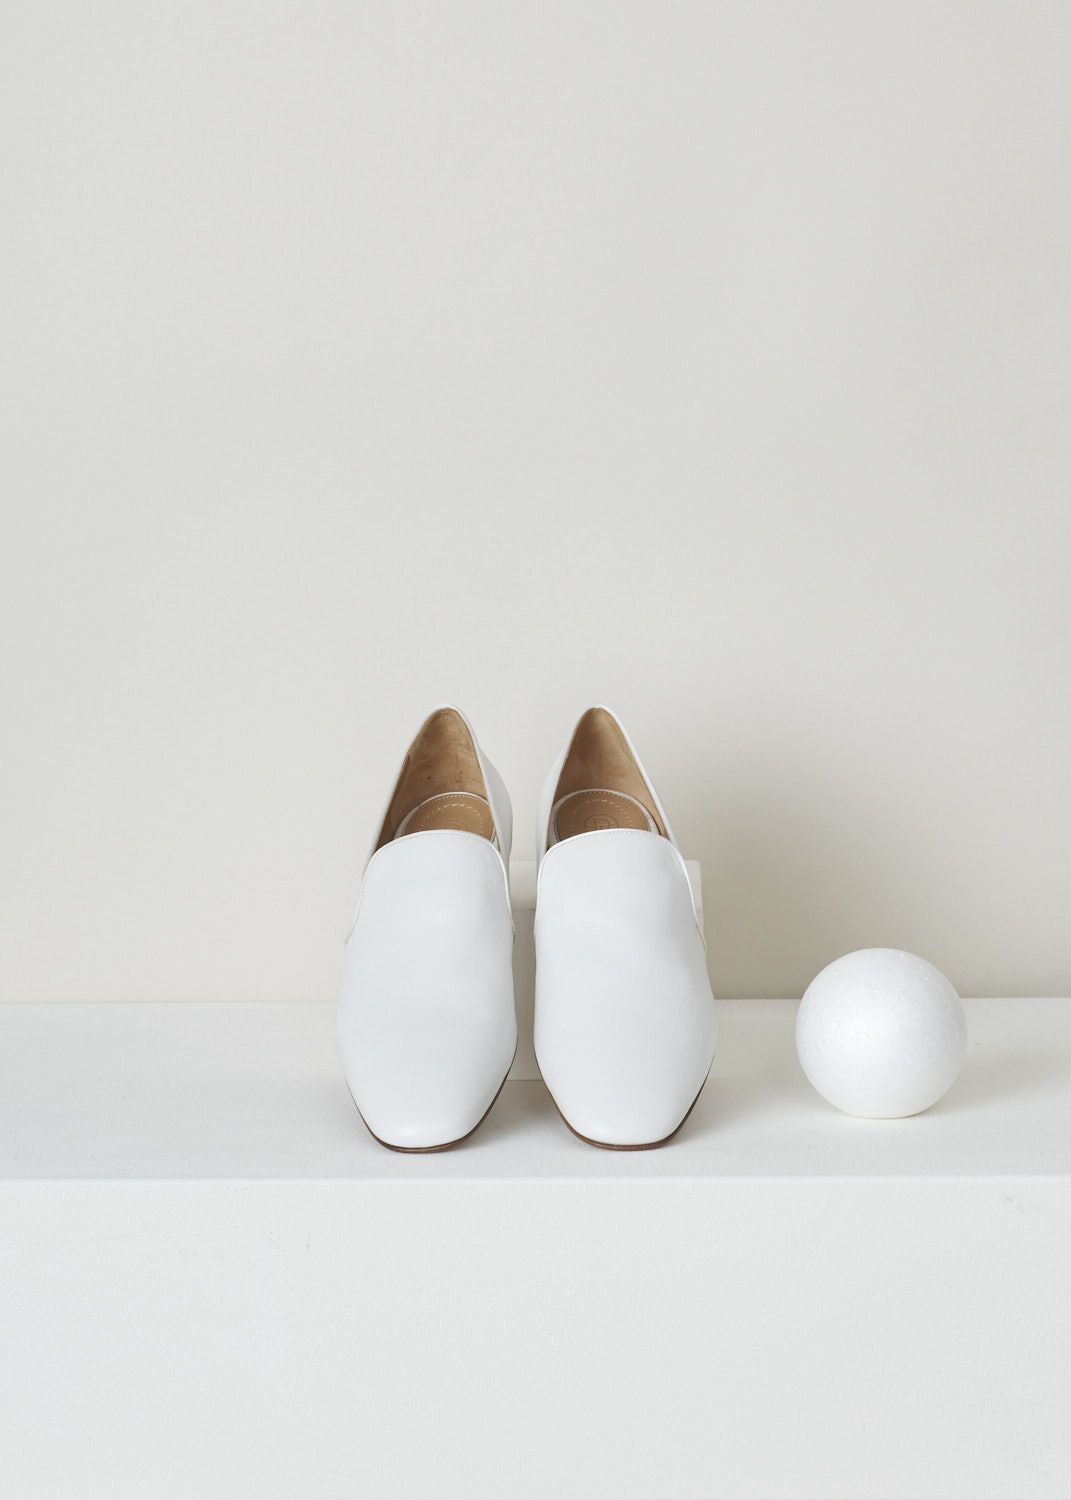 The Row, White leather alys slipper, F1005_L64_WHT, white, top, Made from a minimalist perspective, and crafted out of butter-soft calfskin. Featuring a rounded toe vamp and comes with white satin piping on the topline. The seamless lining ensures they can be worn with or without socks.